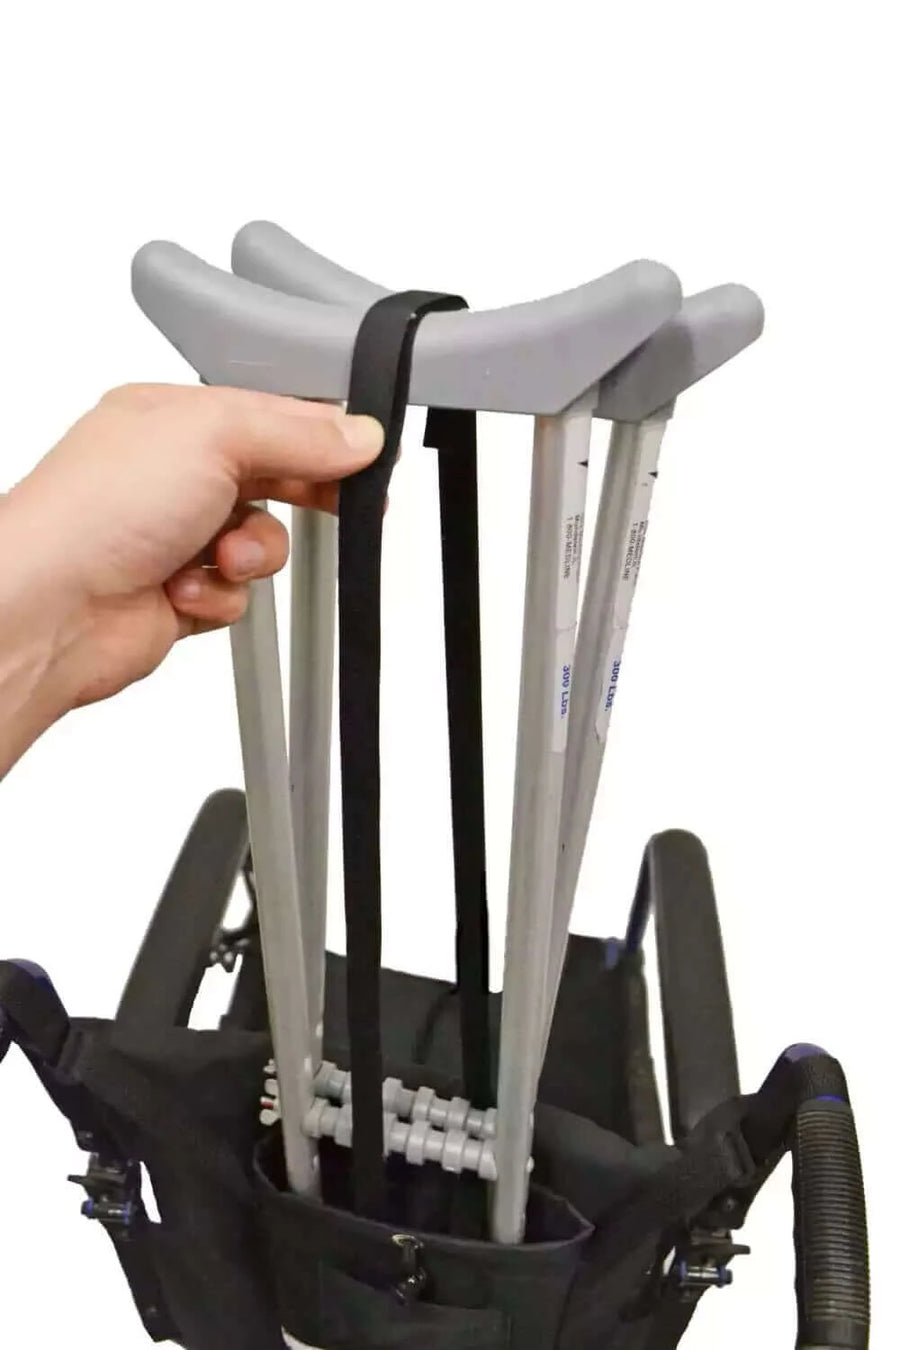 Diestco - Crutch Holder for Wheelchairs with person putting crutches in it